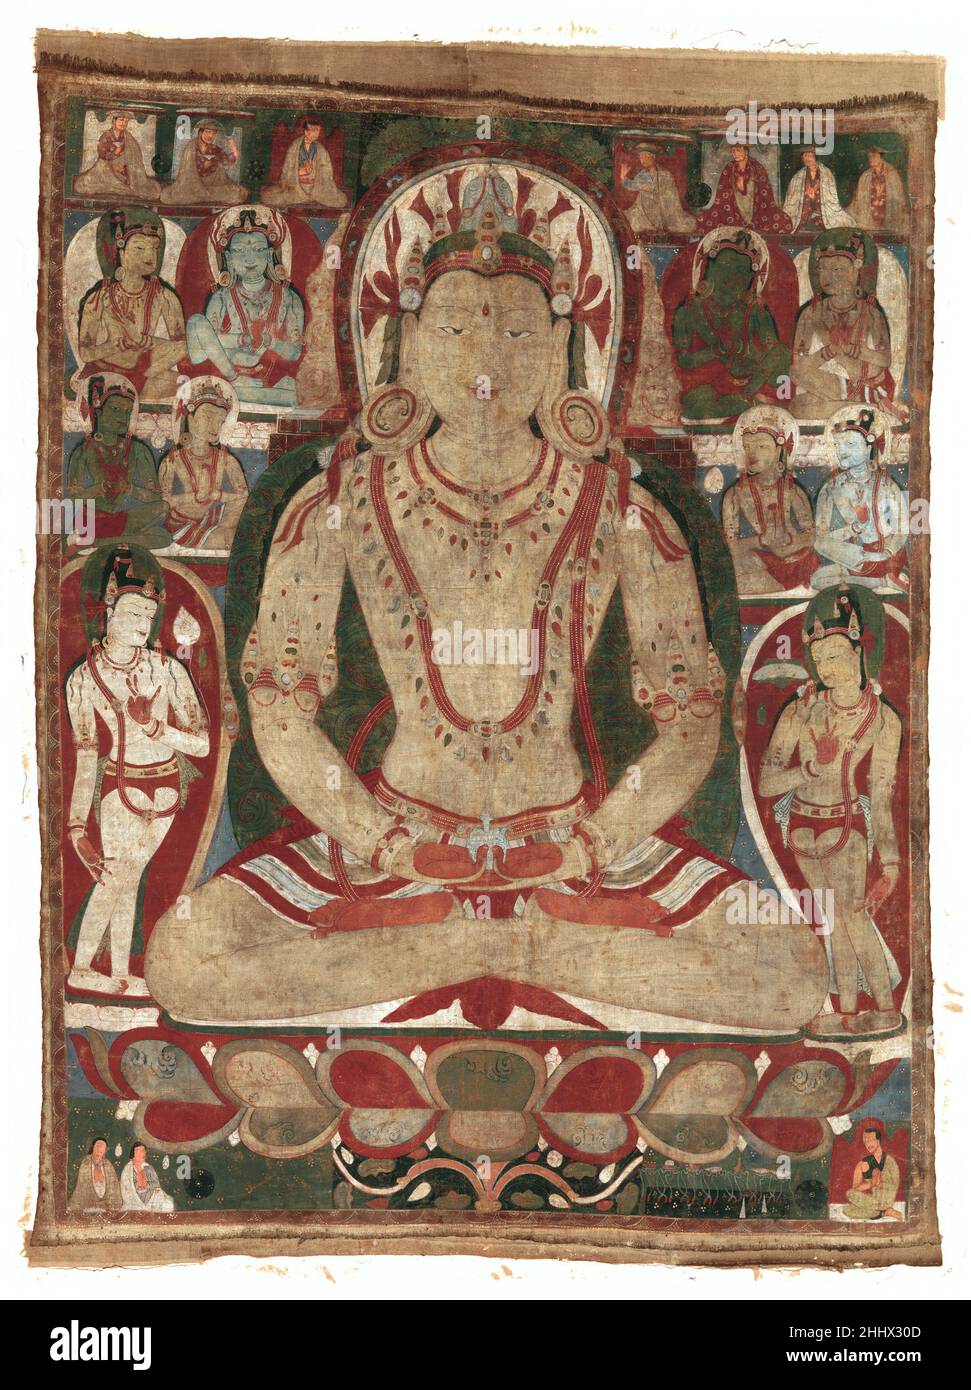 The Buddha Amitayus Attended by Bodhisattvas 11th or early 12th century Tibet The cult of Amitayus, the Buddha of Eternal Life, was popular in Tibet, where his followers believed that devotion to this Buddha would prolong life. Amitayus is shown holding a jar containing the elixir of immortality, amrita, in his lap. He is richly bejeweled and has a golden complexion, creating radiance appropriate to his transcendent nature. He mediates in a heavenly assembly of bodhisattvas, flanked by two standing bodhisattvas typical of medieval eastern Indian art and an array of seated bodhisattvas who rece Stock Photo